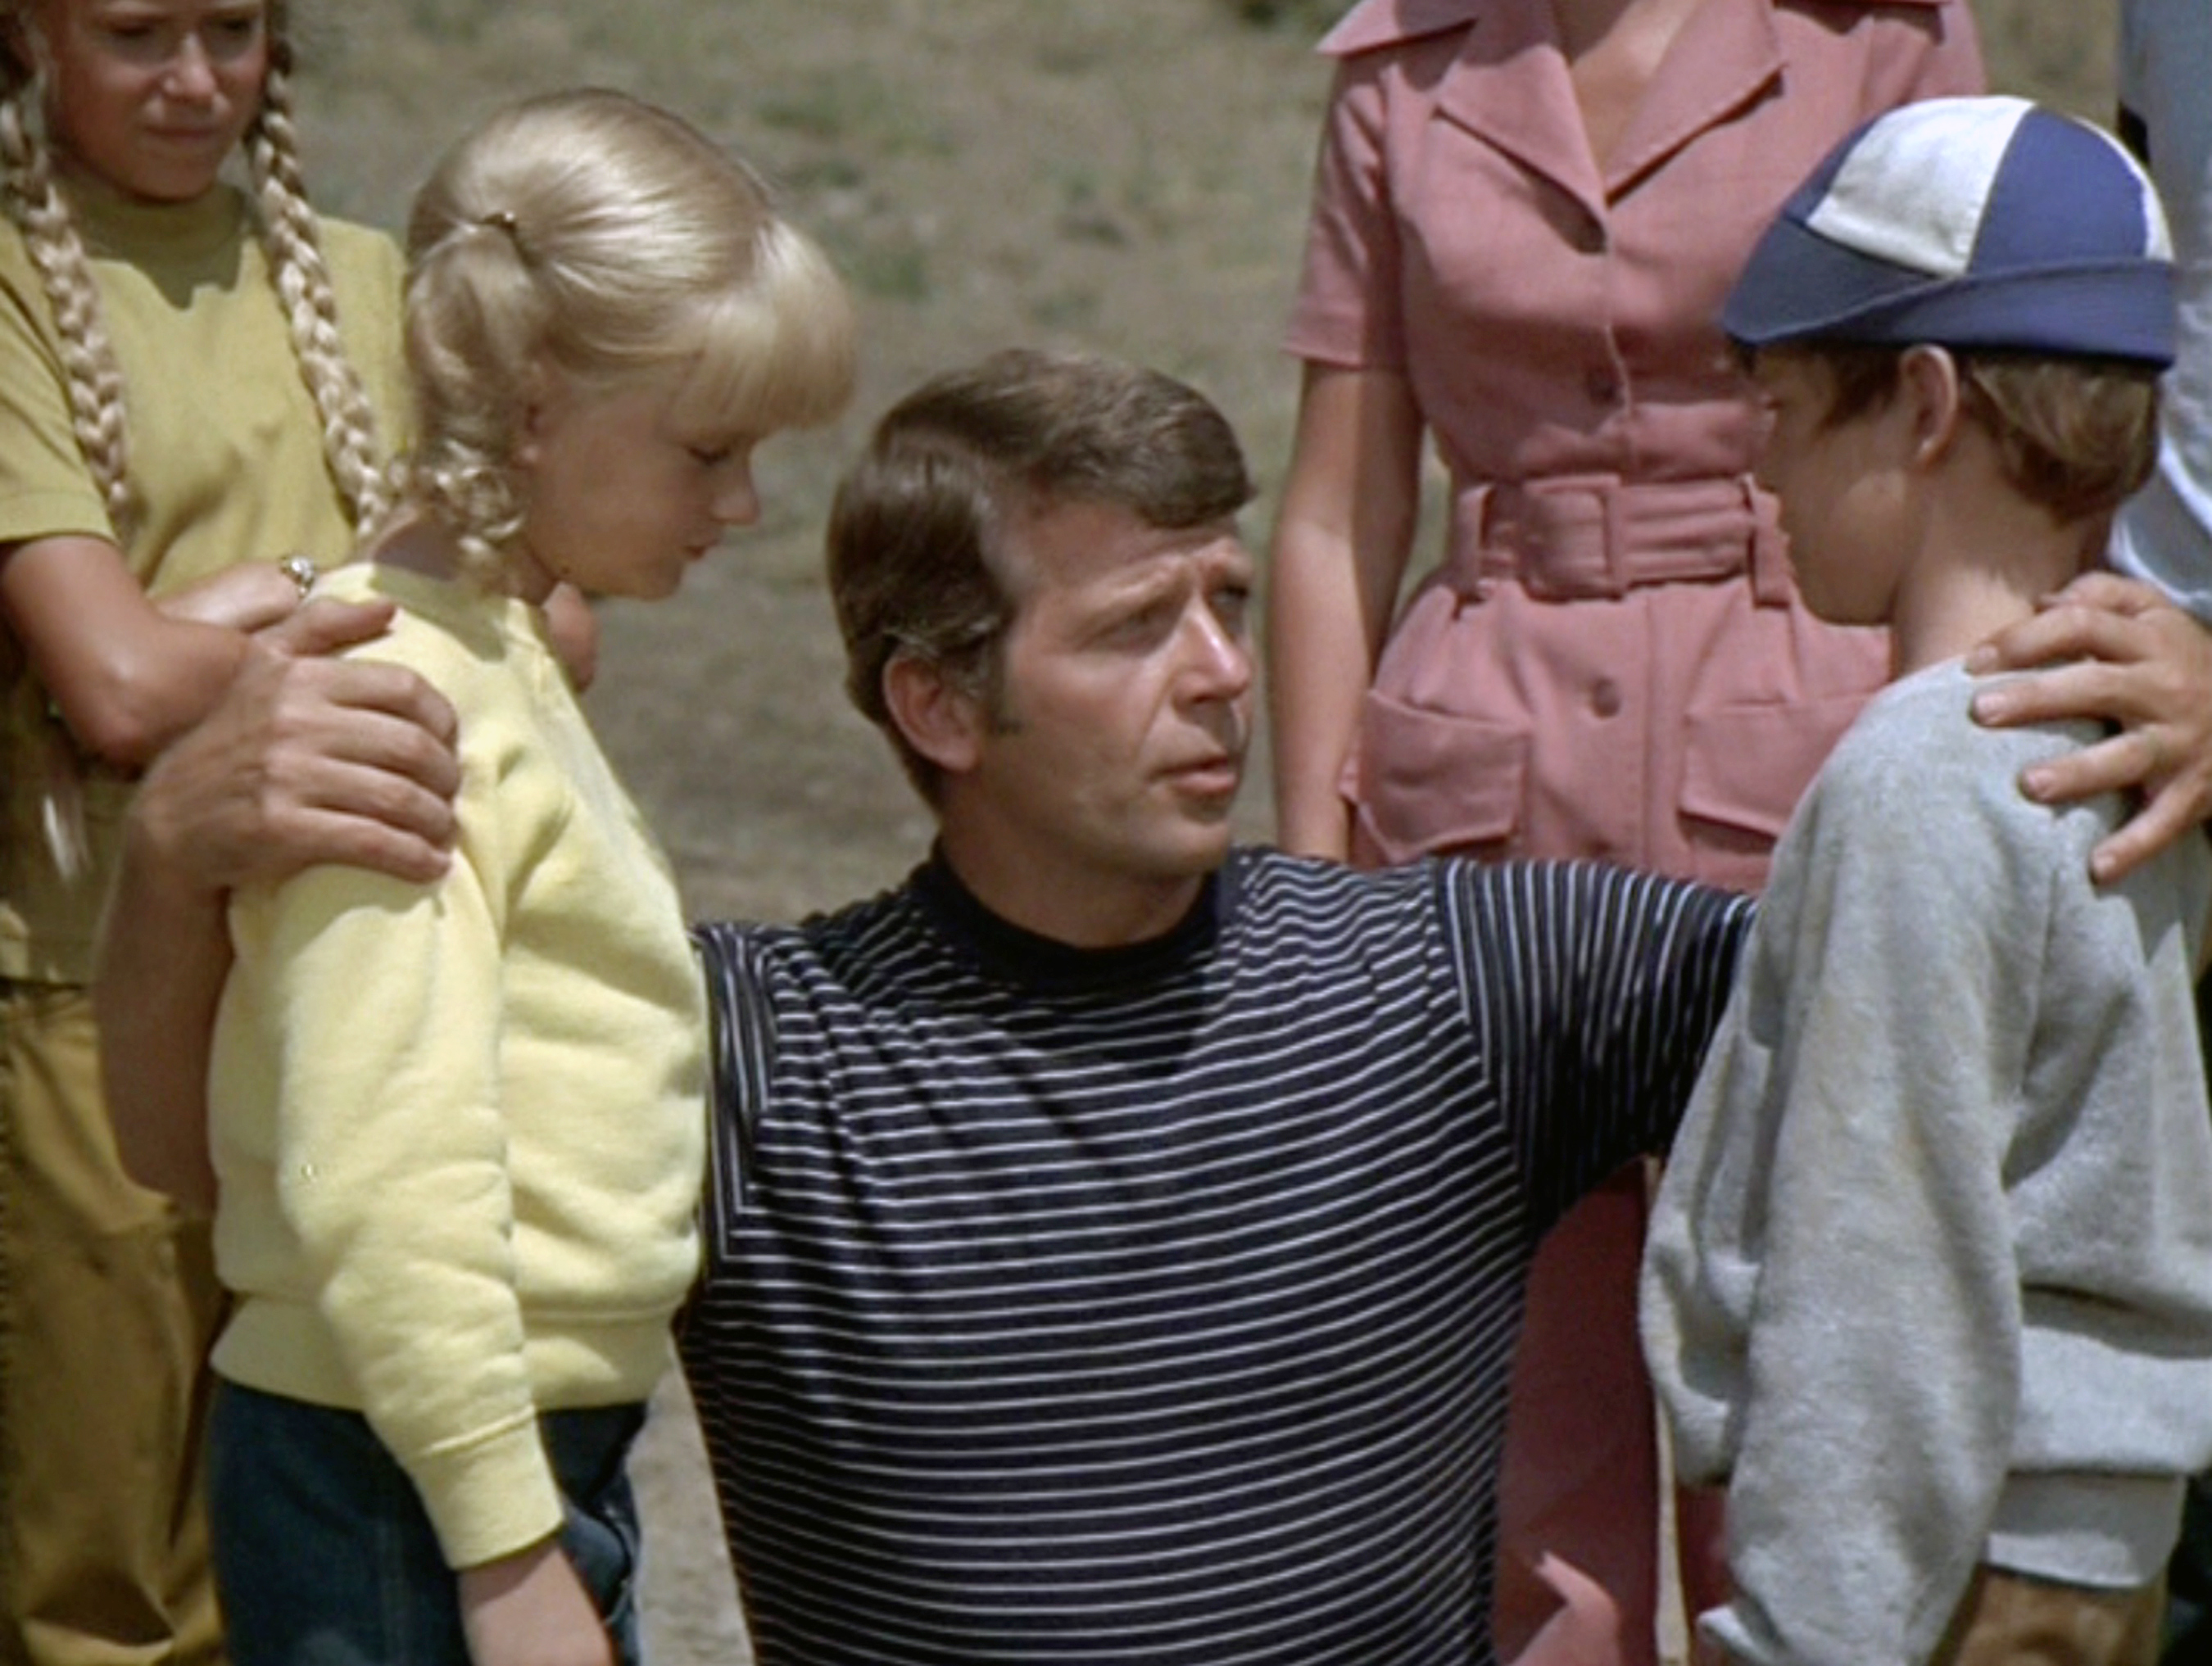 Susan Olsen, Robert Reed, and Mike Lookinland as Cindy, Mike, and Bobby Brady in "The Brady Braves" episode of "The Brady Bunch" in 1971 | Source: Getty Images